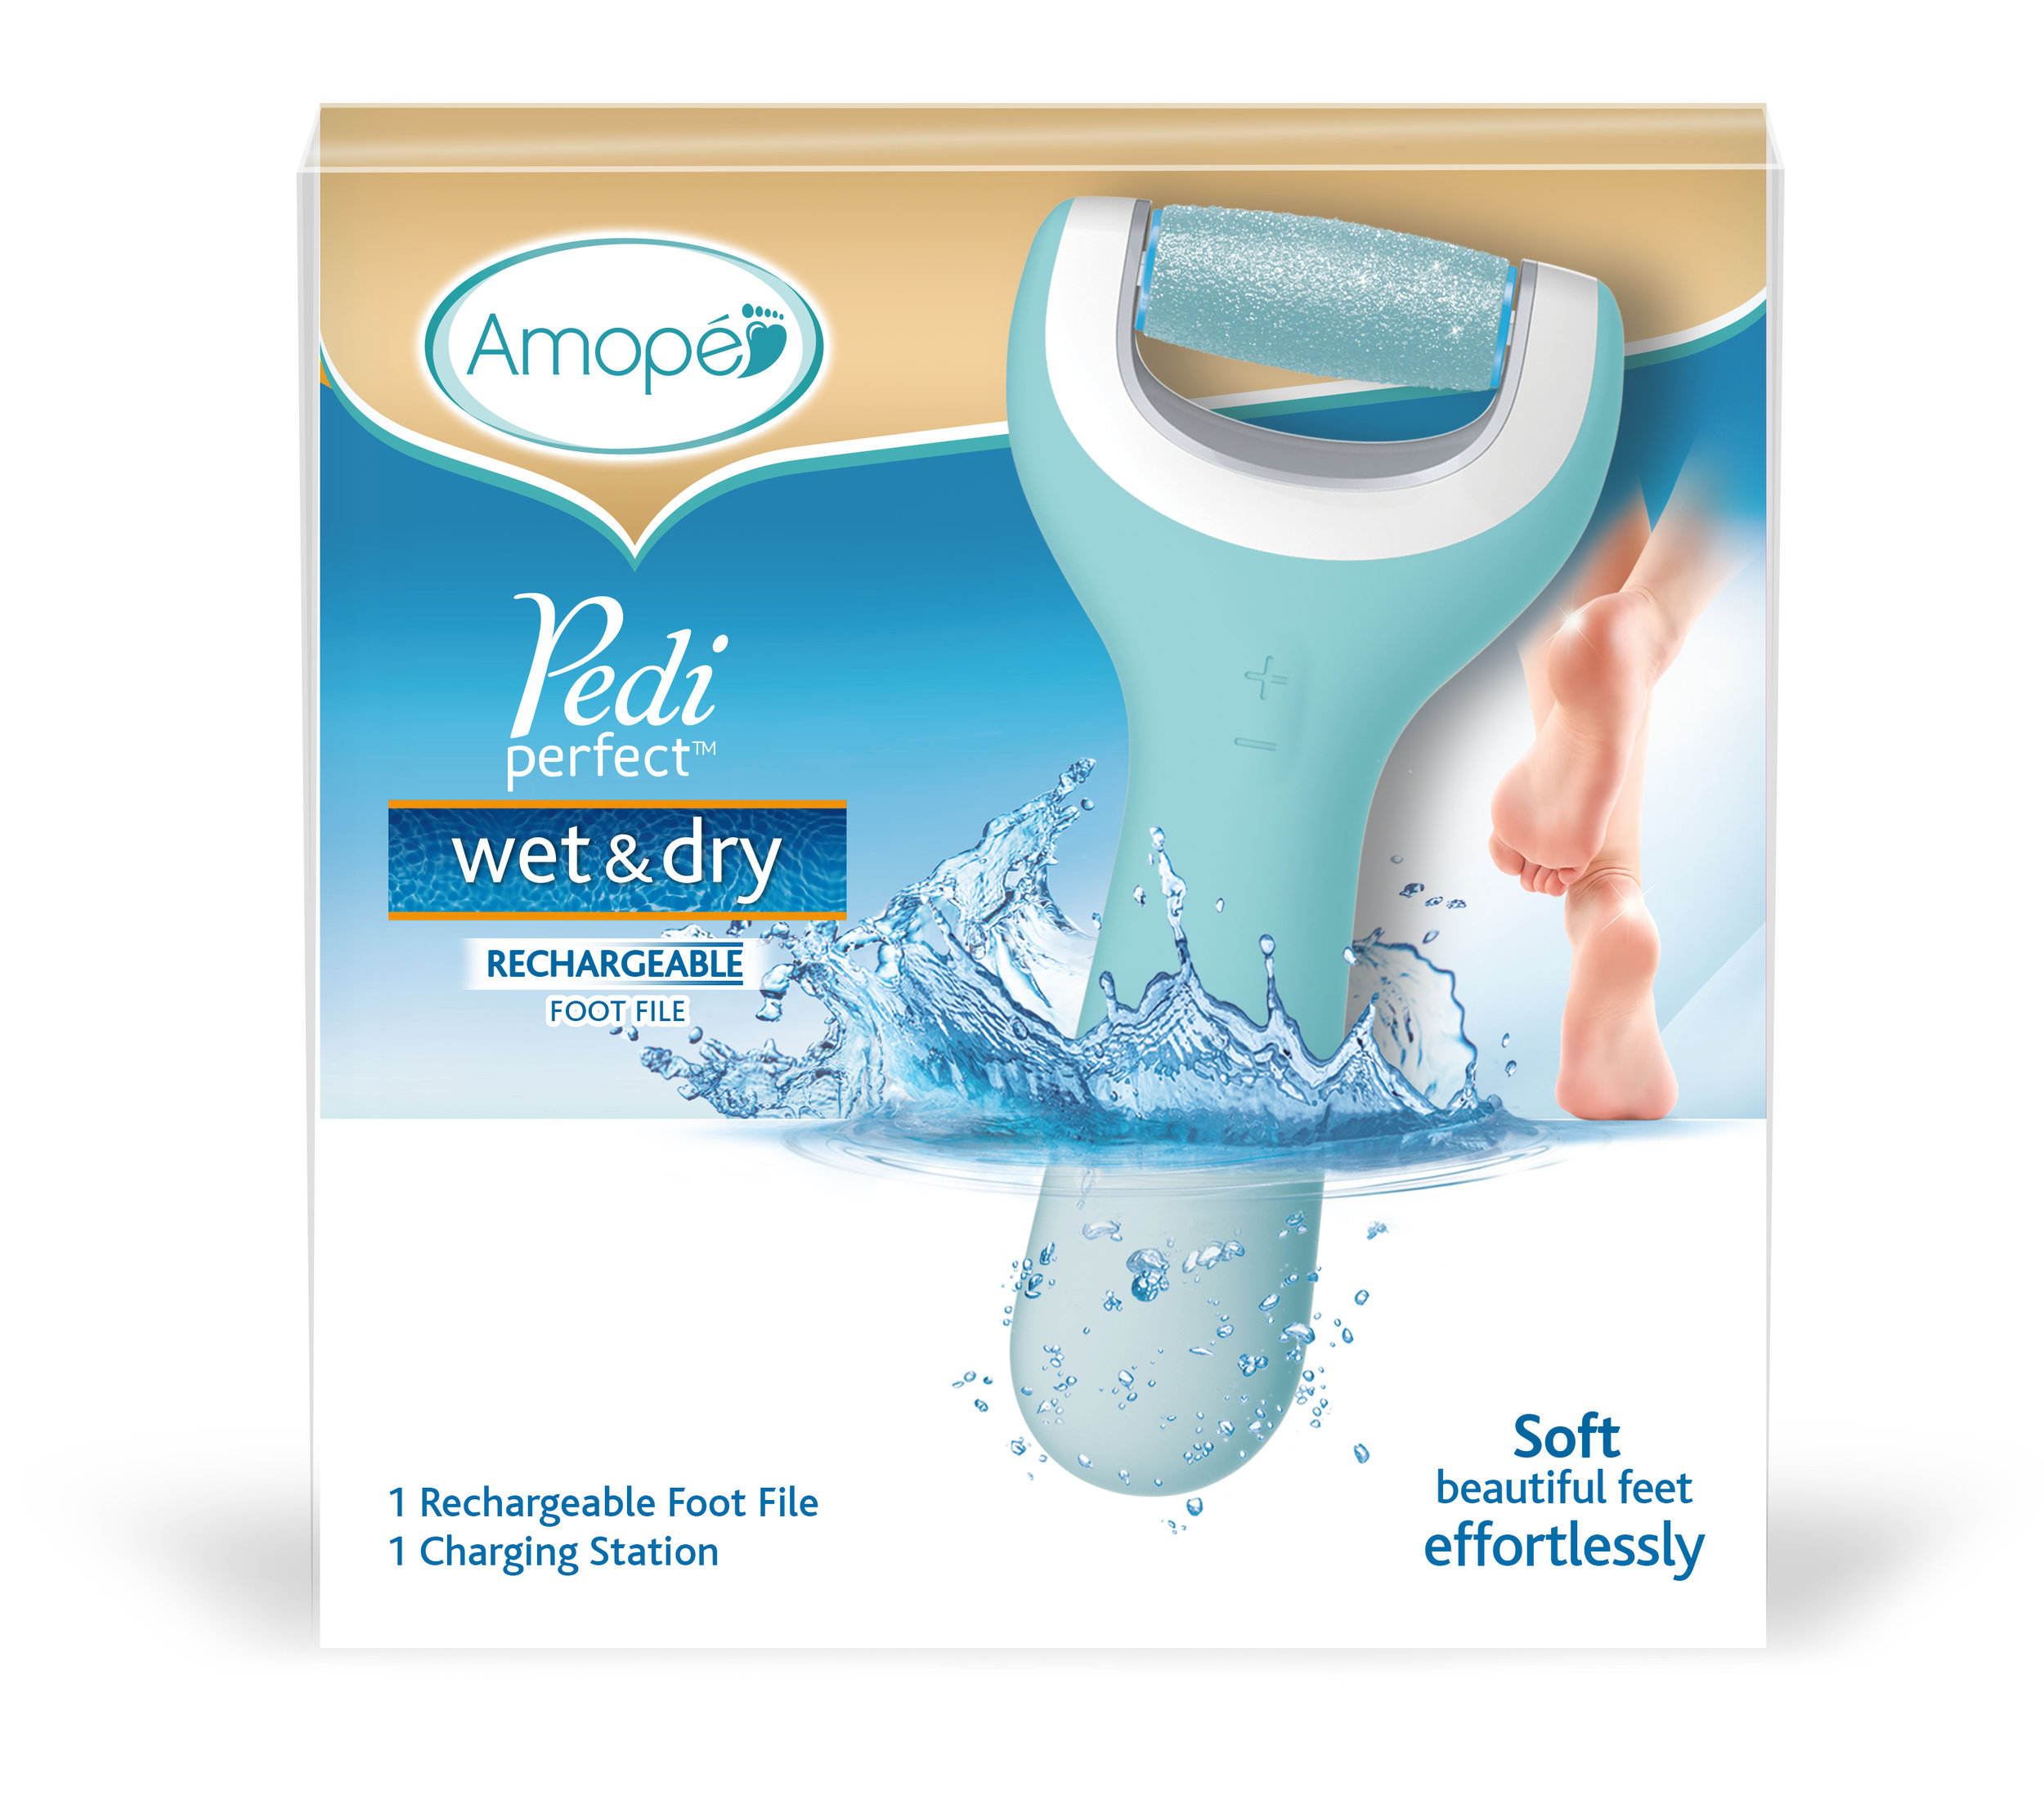 Amopé Pedi Perfect Wet & Dry Rechargeable Foot File - In Package.jpg